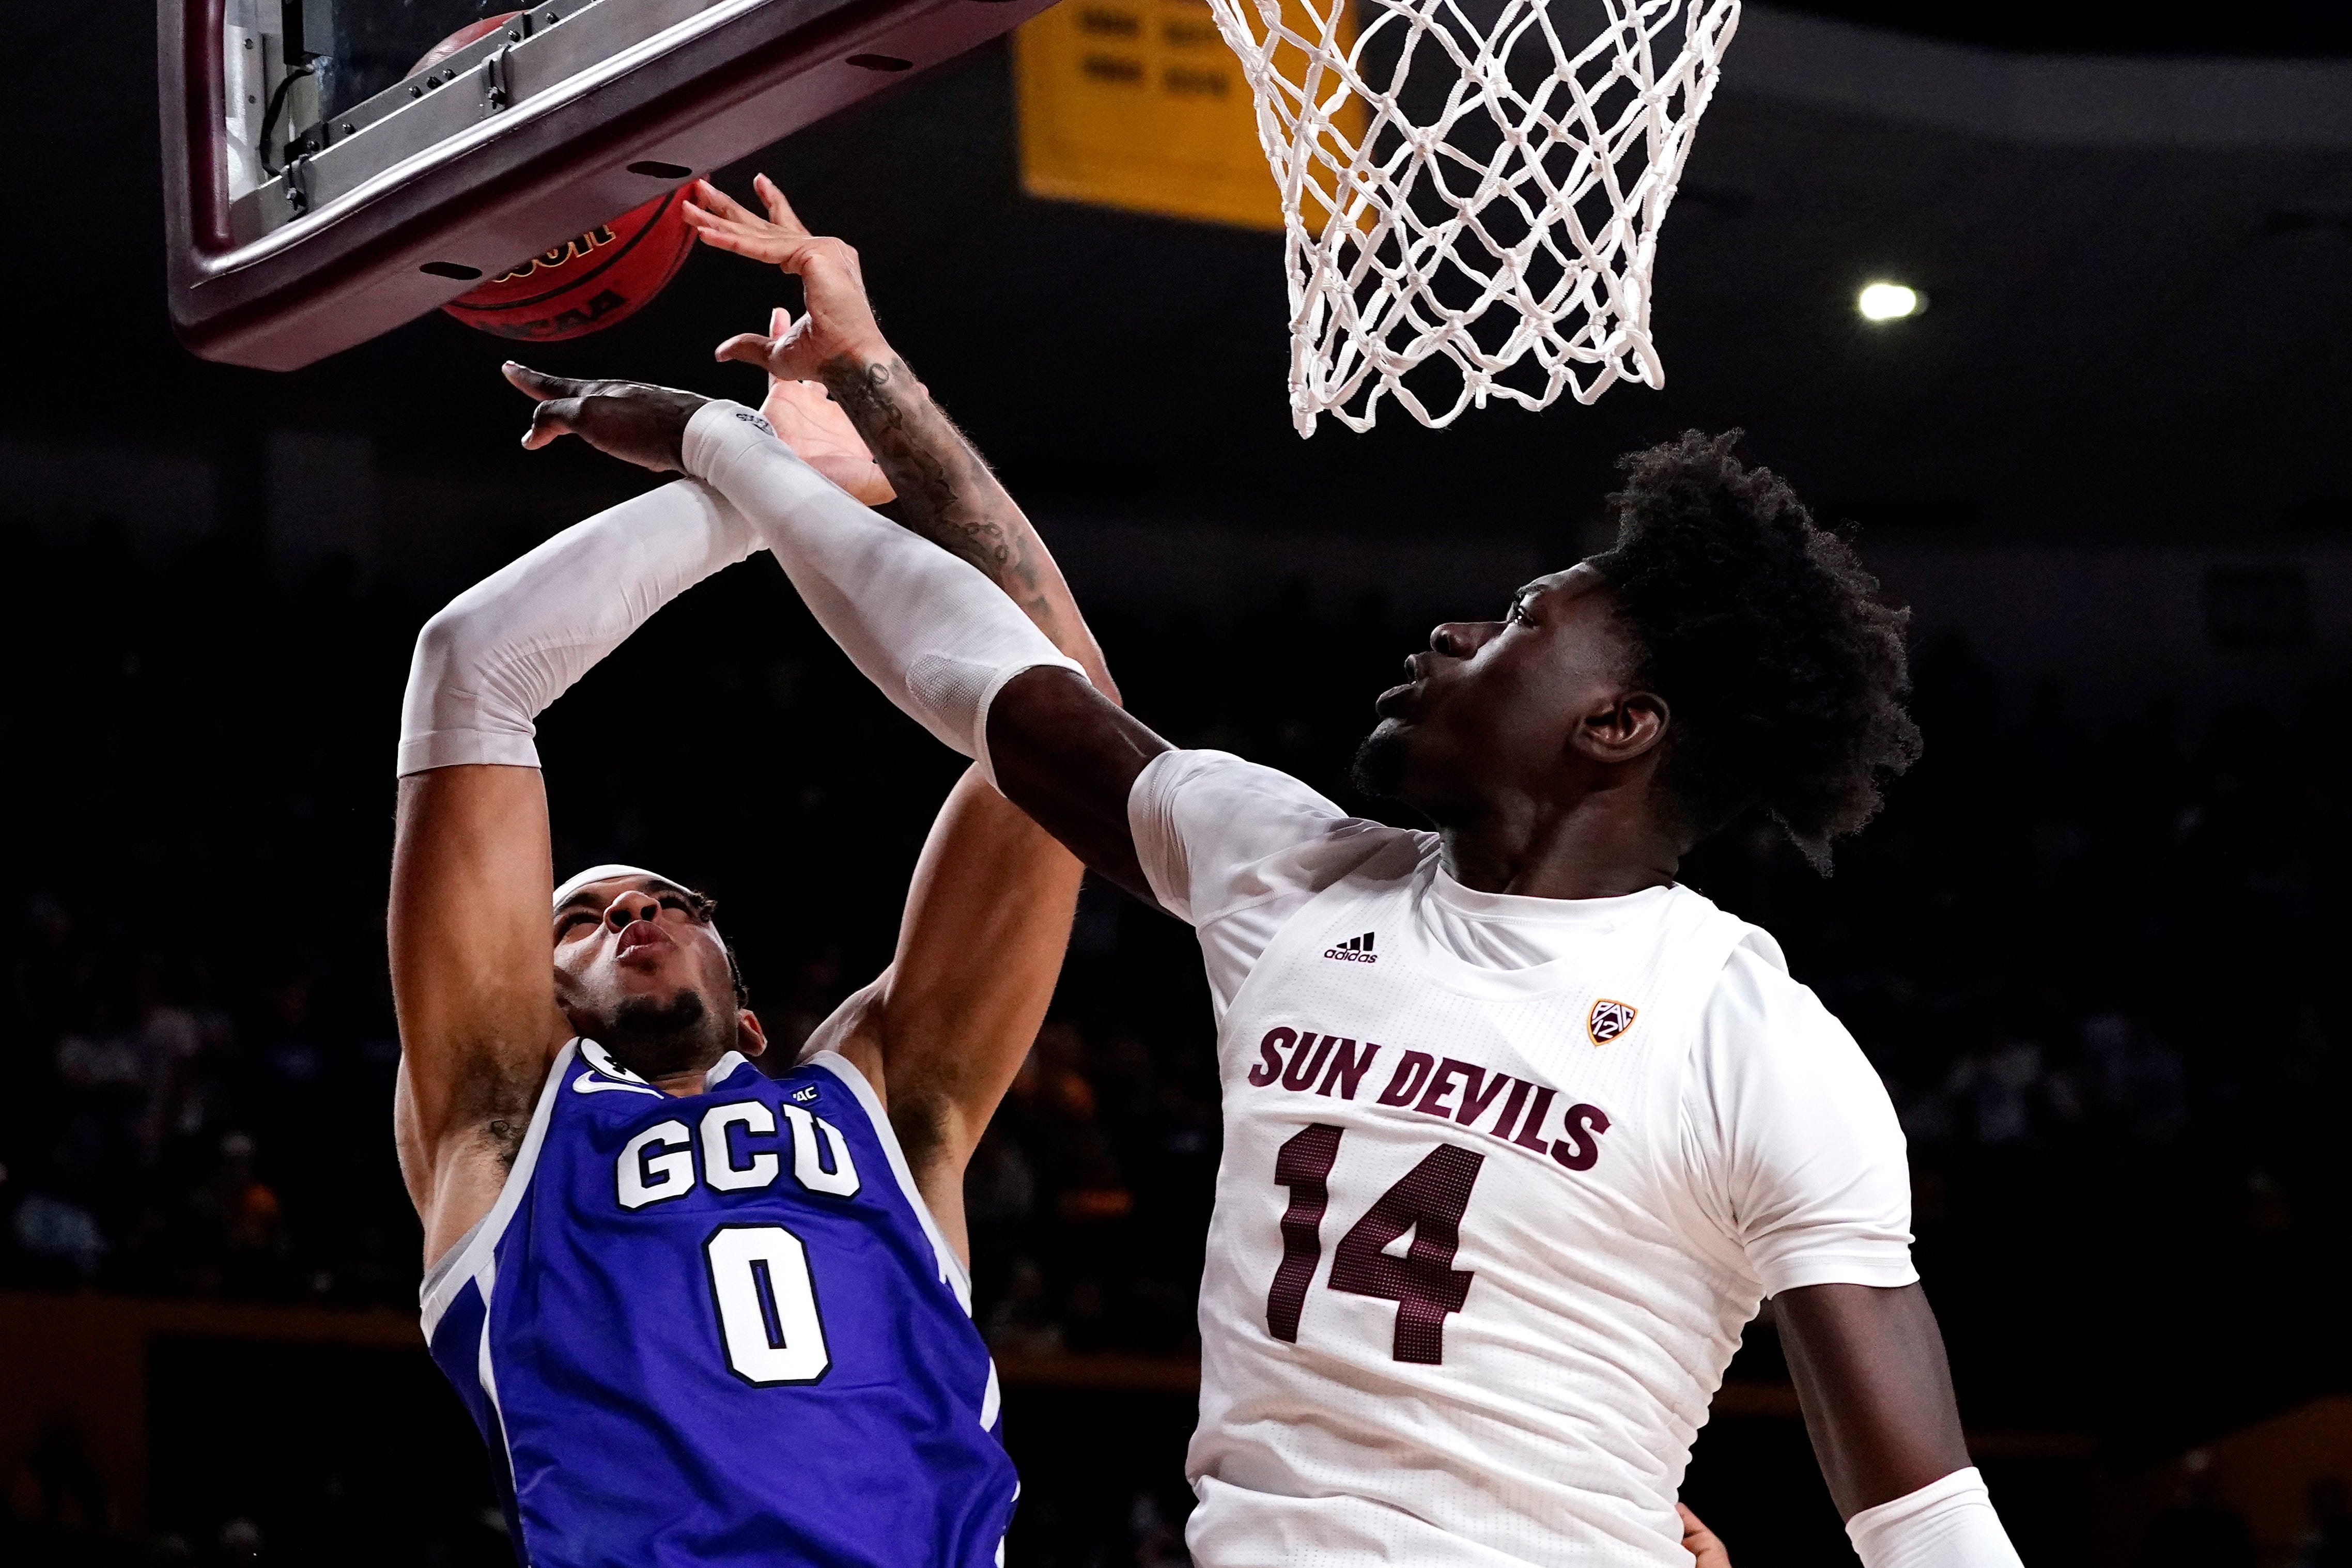 ASU takes bragging rights with win over local foe Grand Canyon